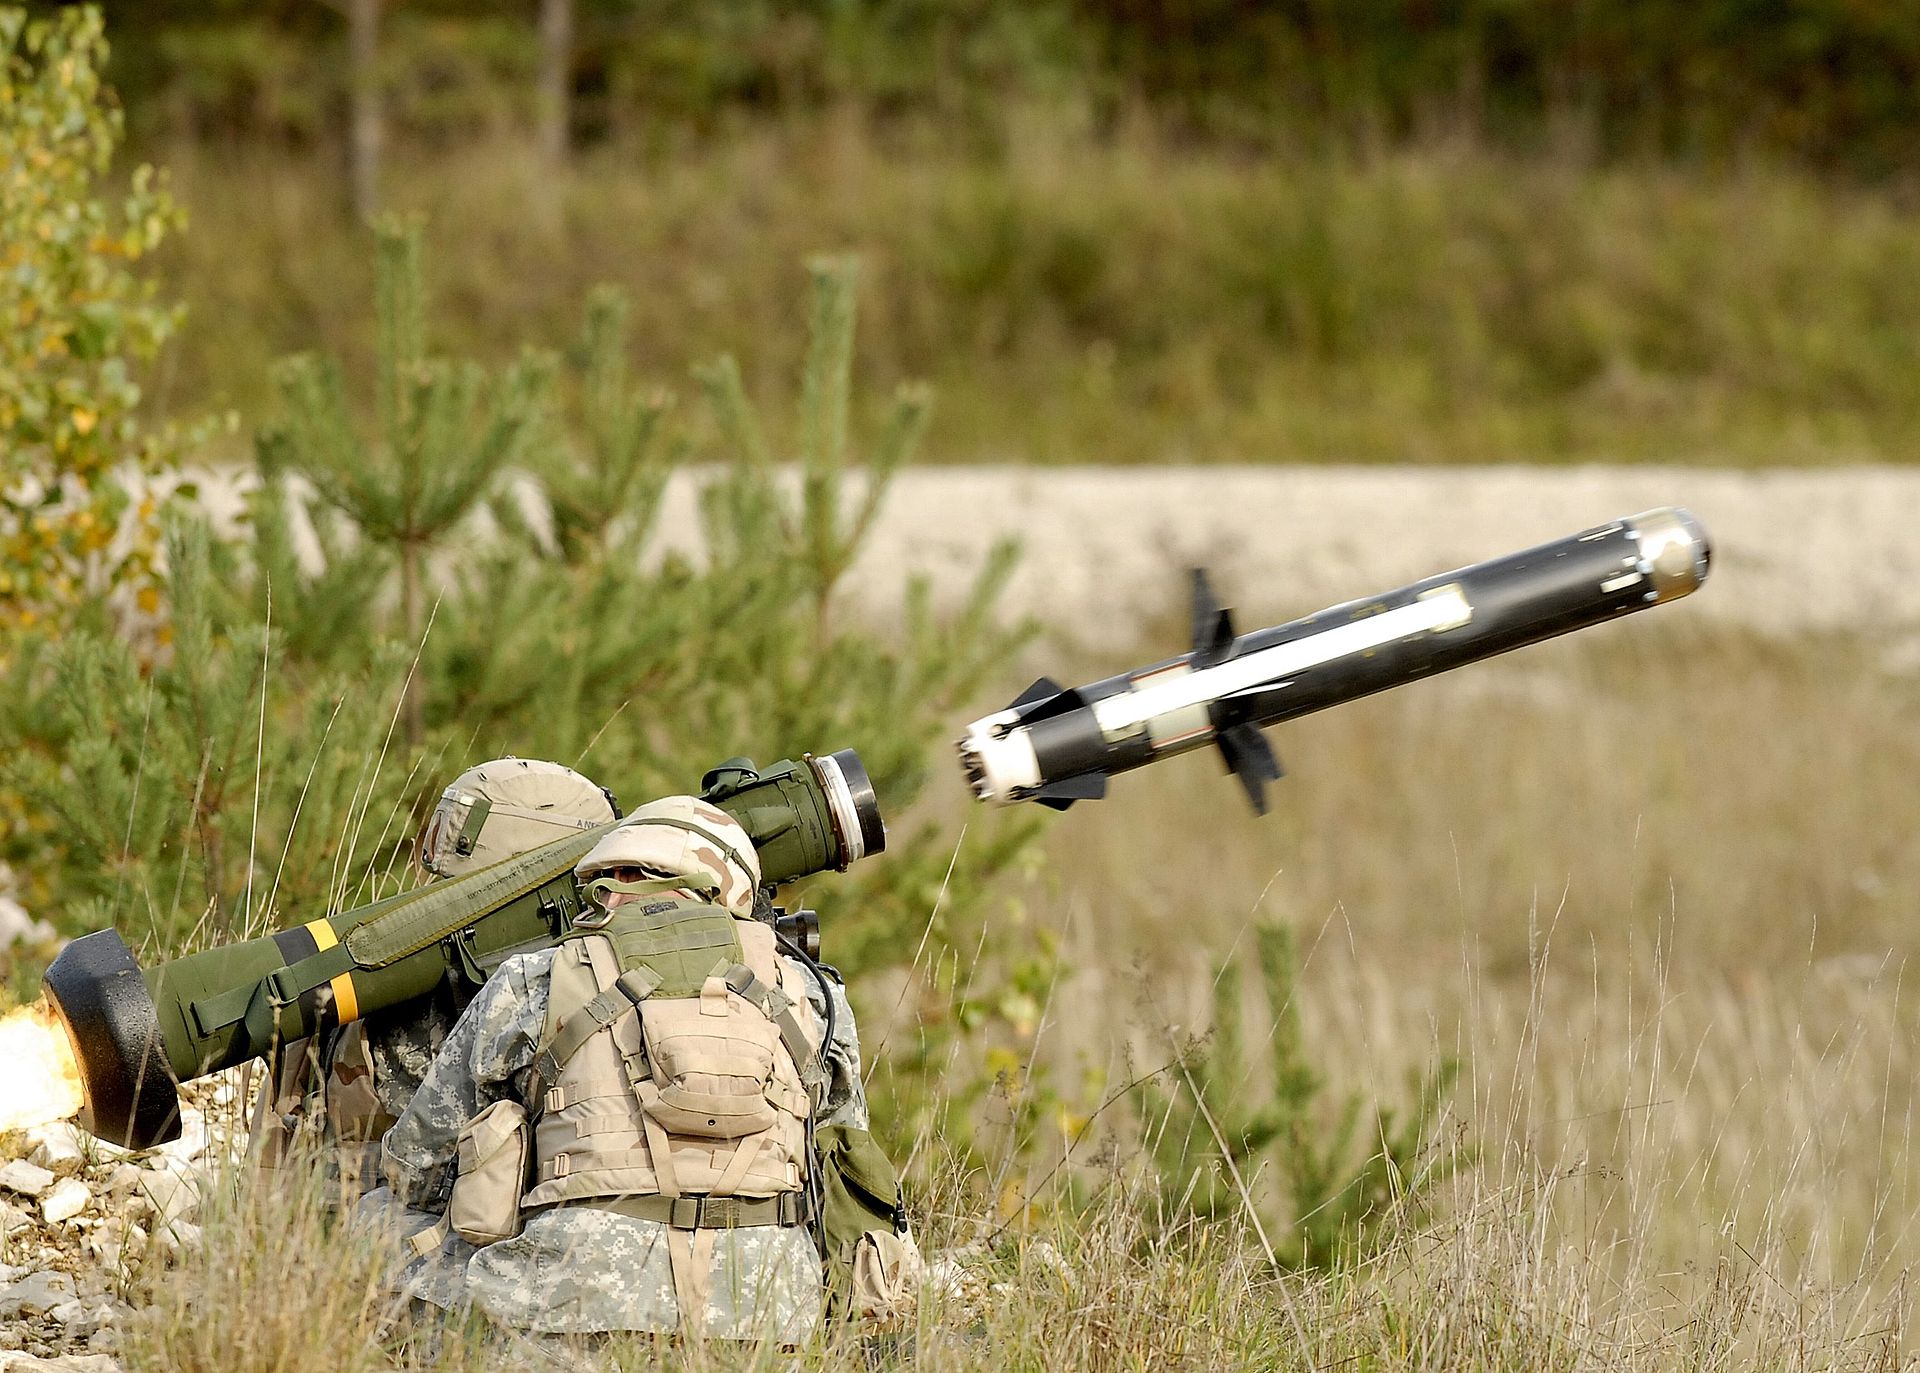 Mil Tech — Javelin F-Model Missile To Be Delivered Next Year